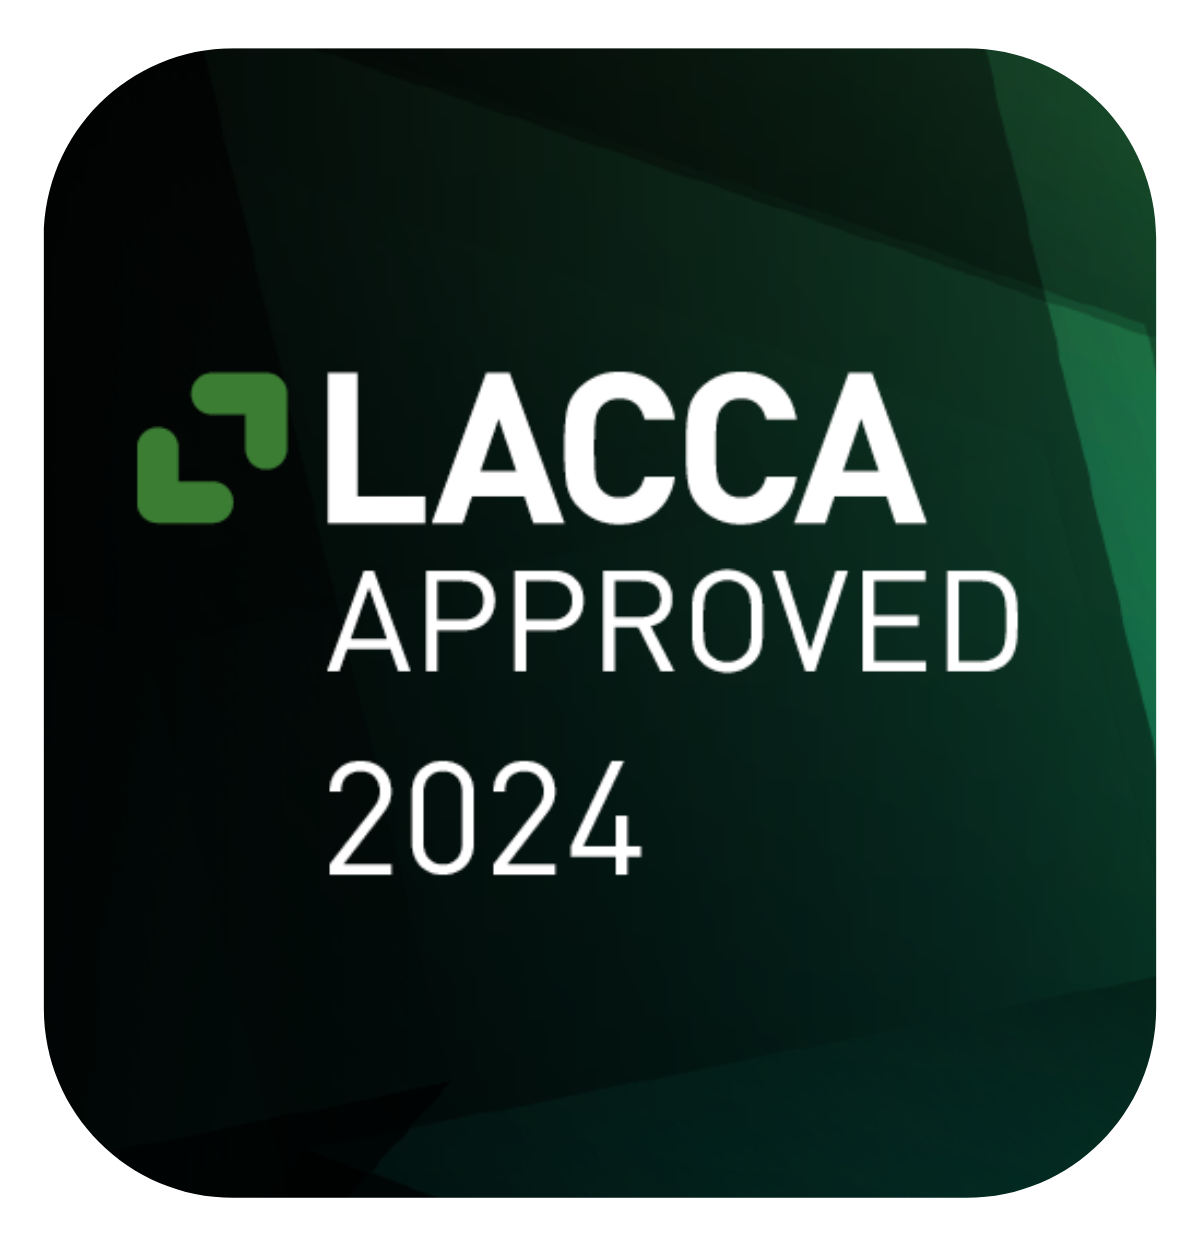 LACCA APPROVED 2024